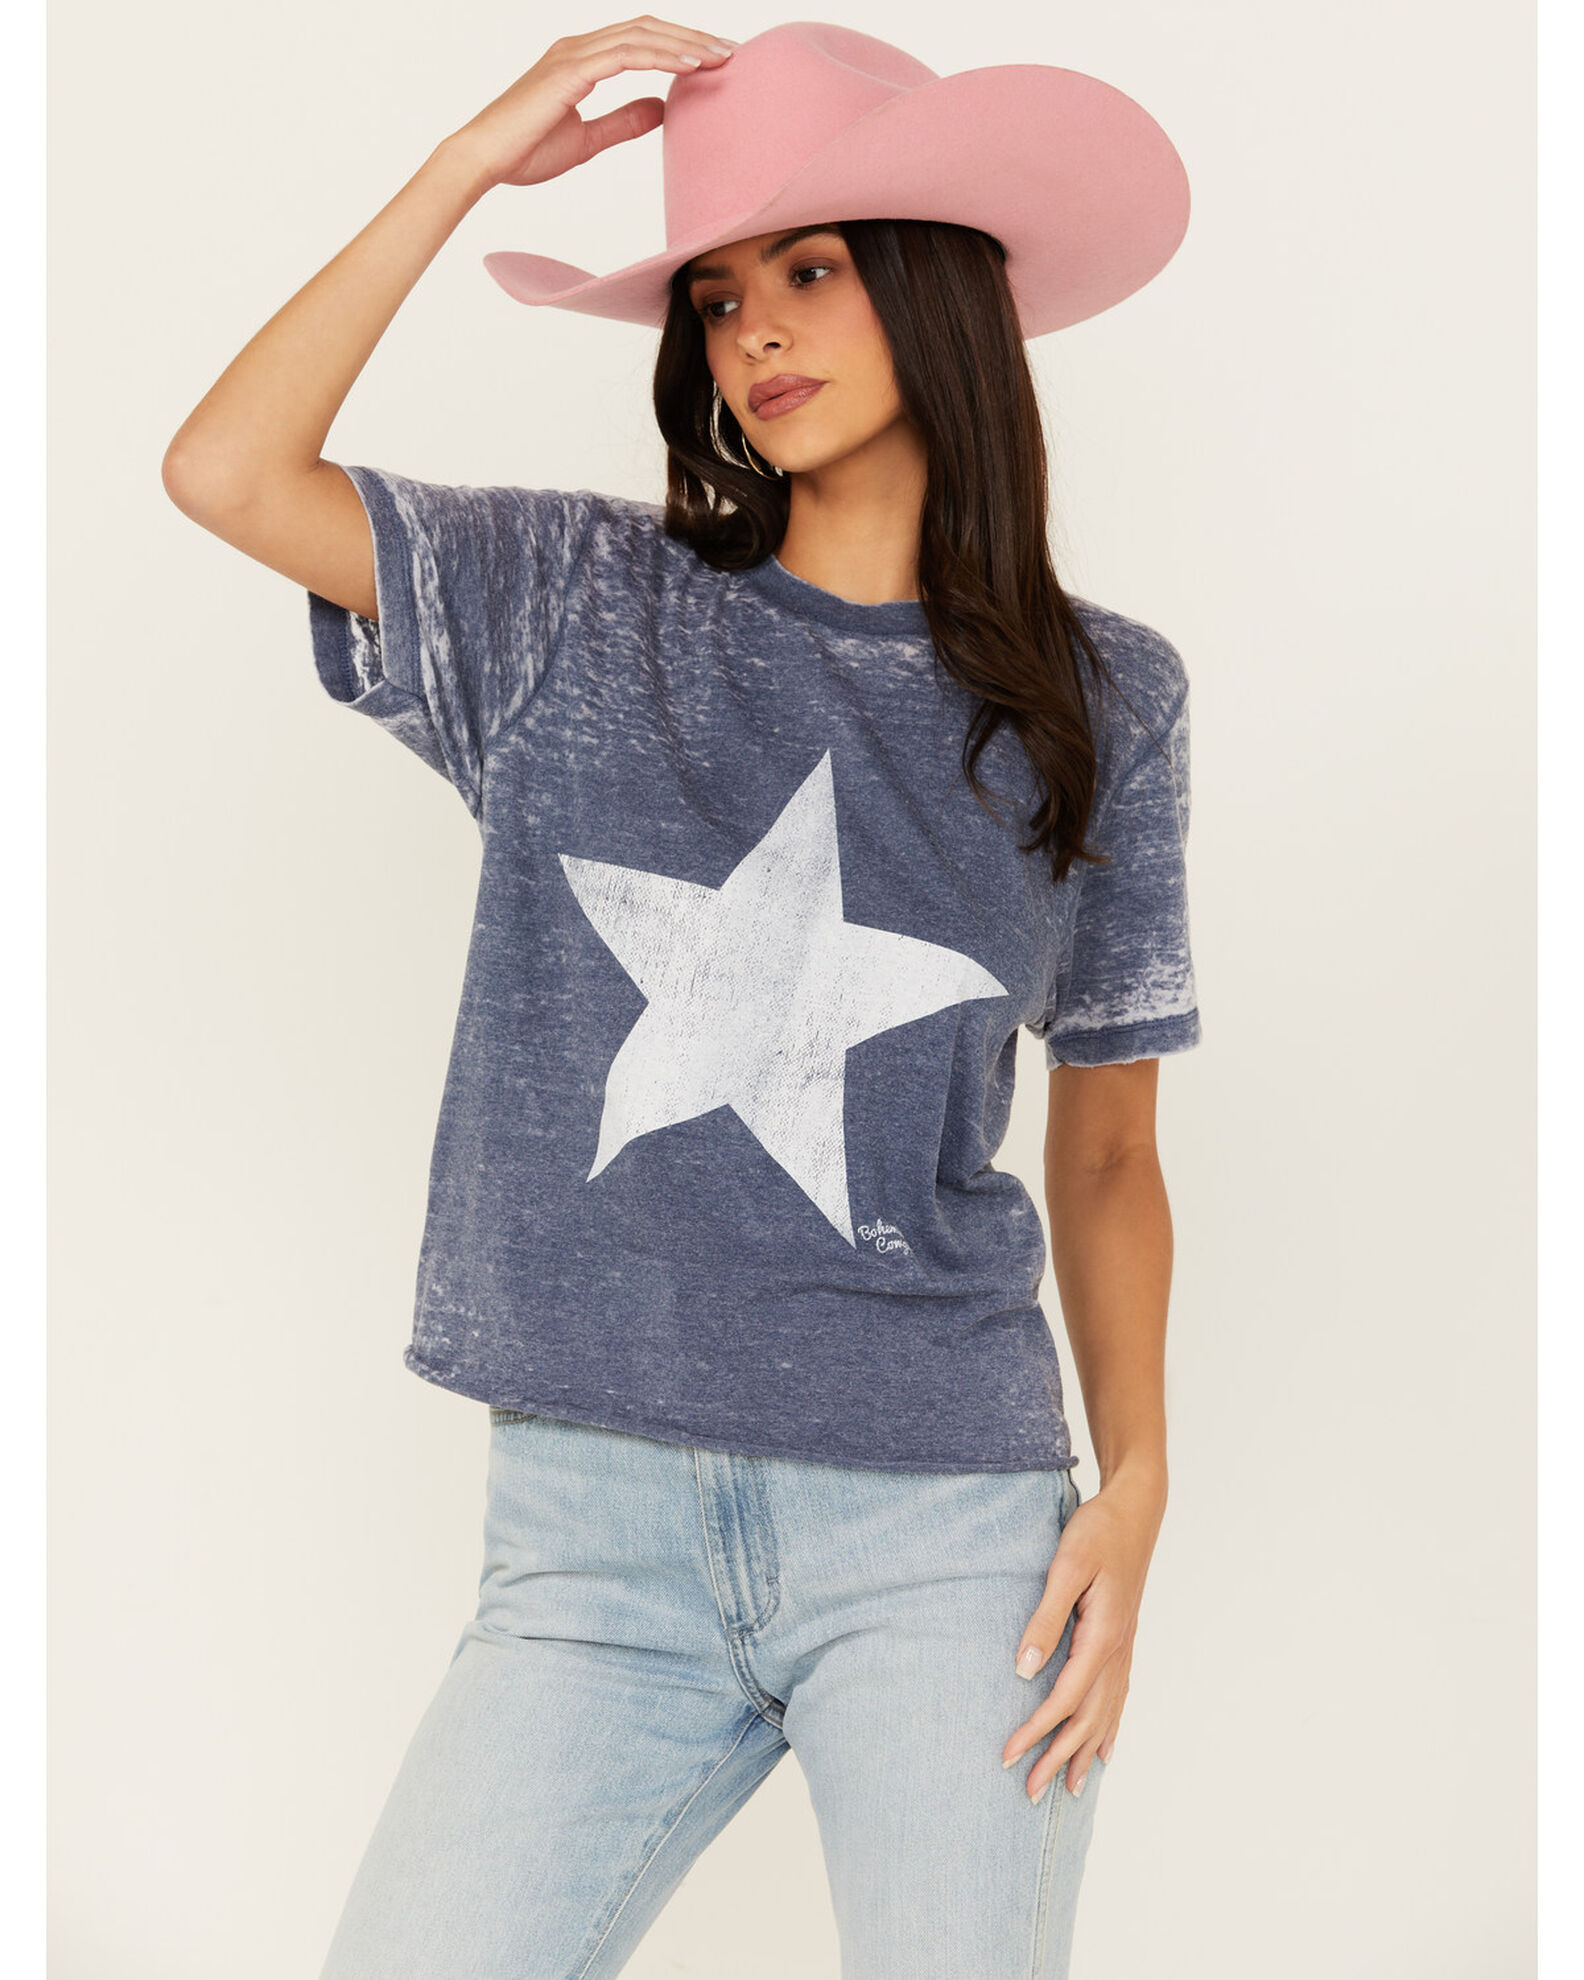 Bohemian Cowgirl Women's Burnout Star Short Sleeve Graphic Tee